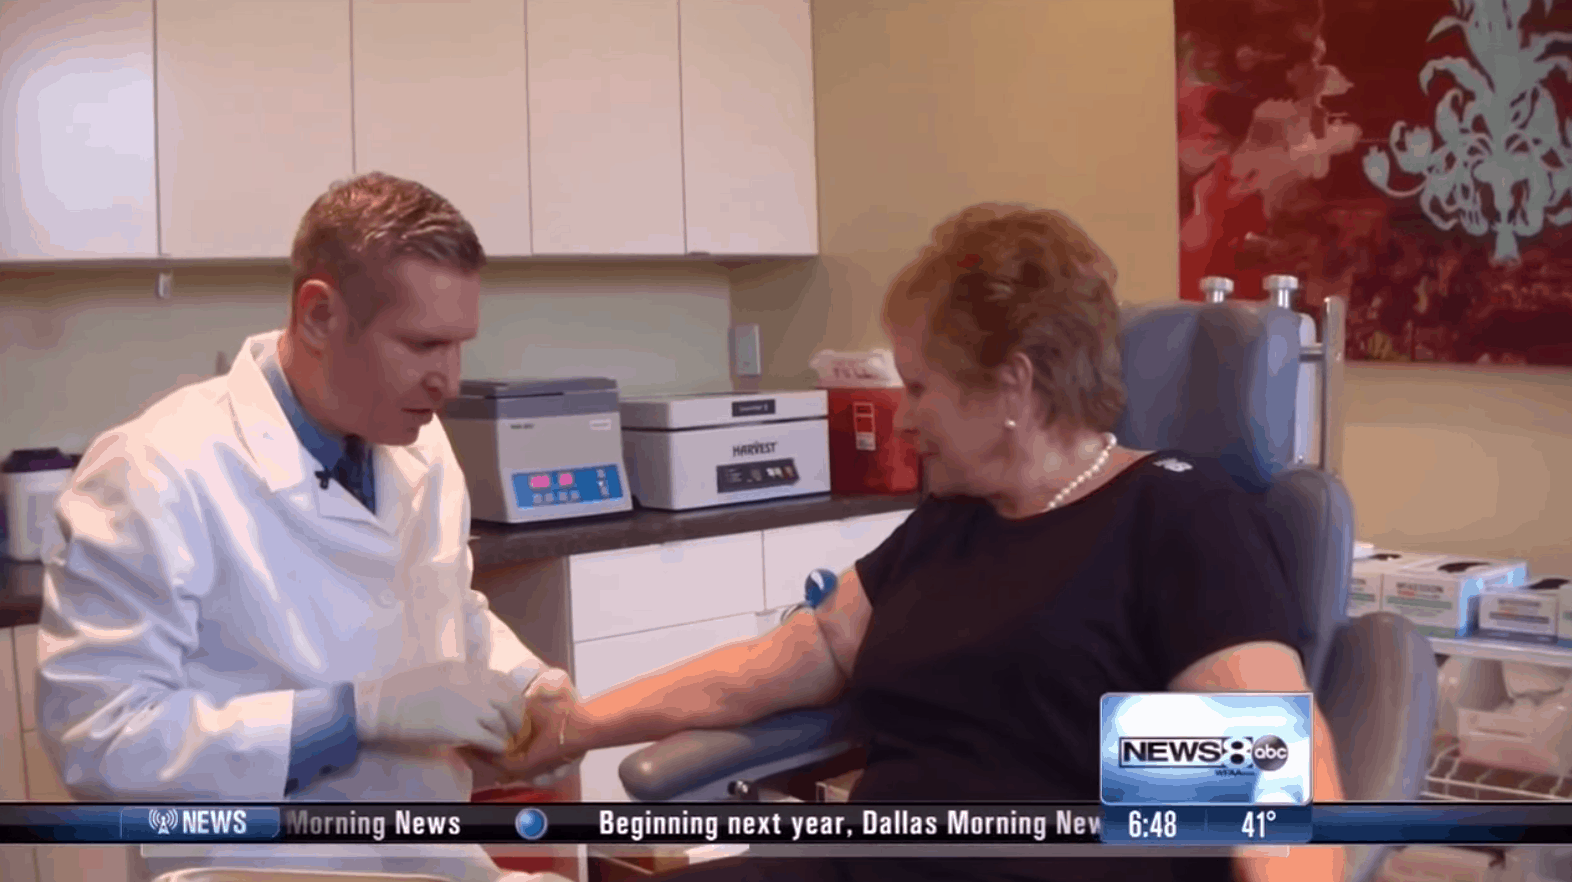 WFAA News talks about PRP Hair Restoration Therapy with William Moore and  Dr. Abraham Armani - Advanced Skin Fitness